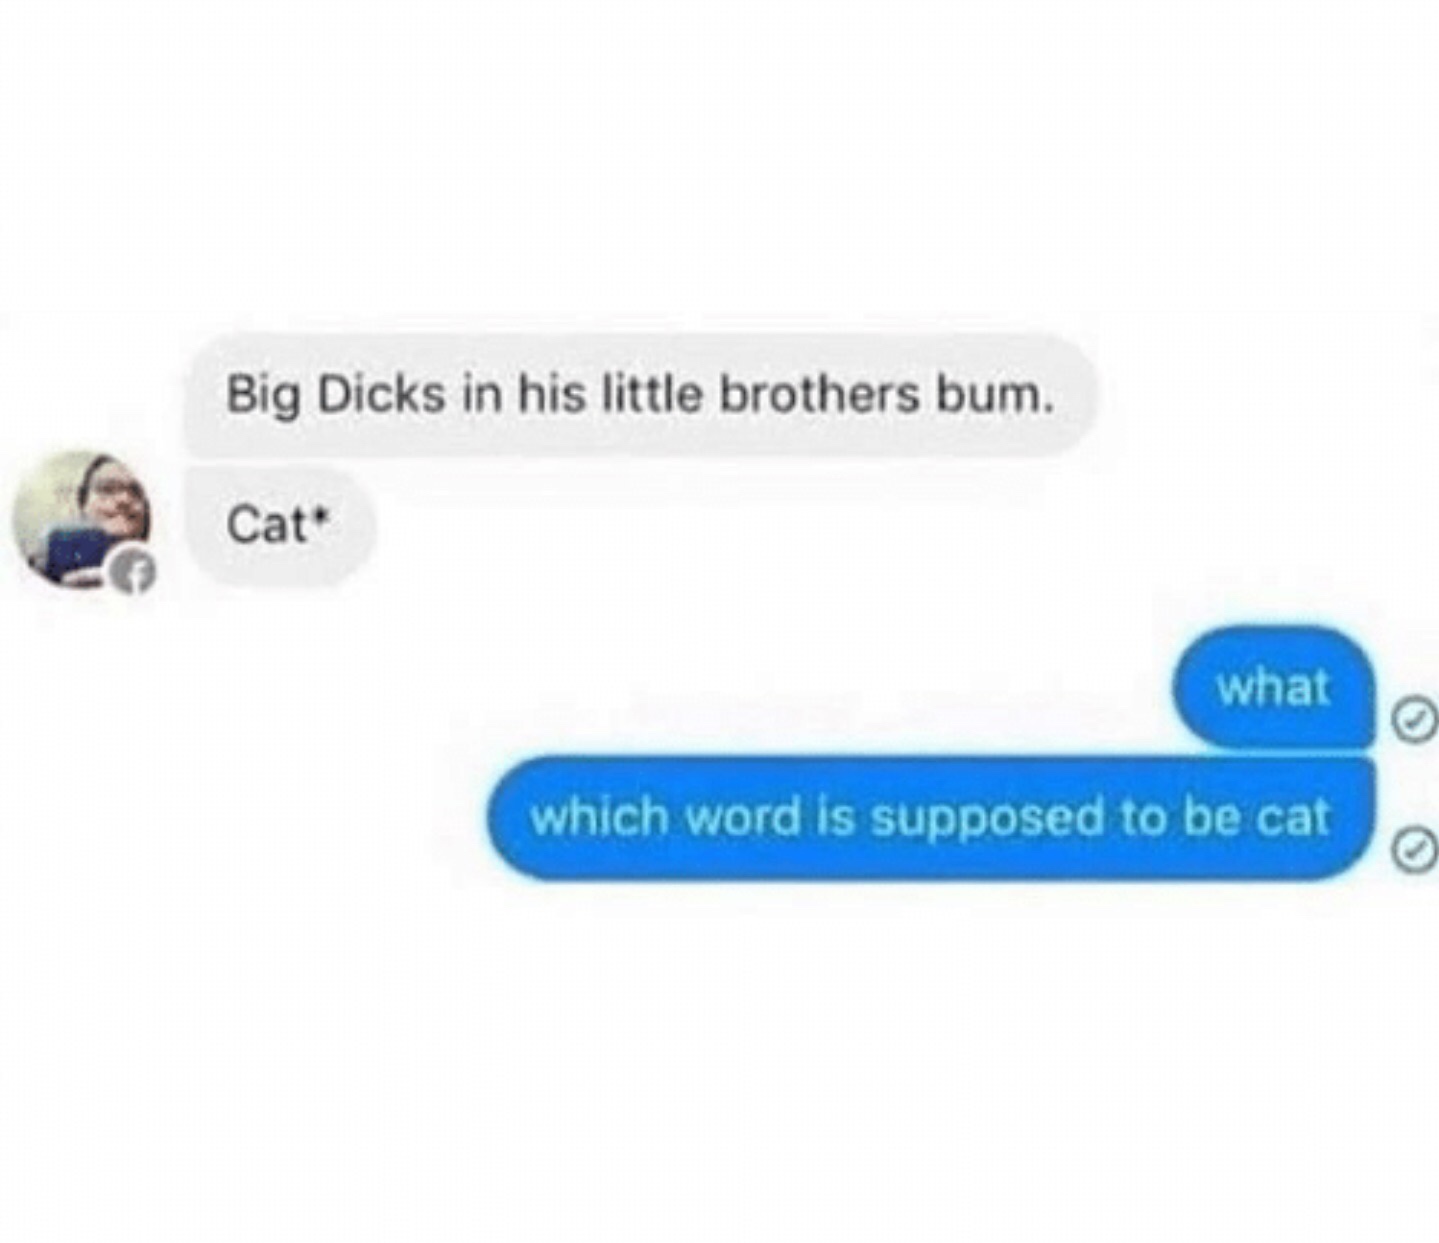 big dicks in his little brothers bum - Big Dicks in his little brothers bum. Cat what which word is supposed to be cat